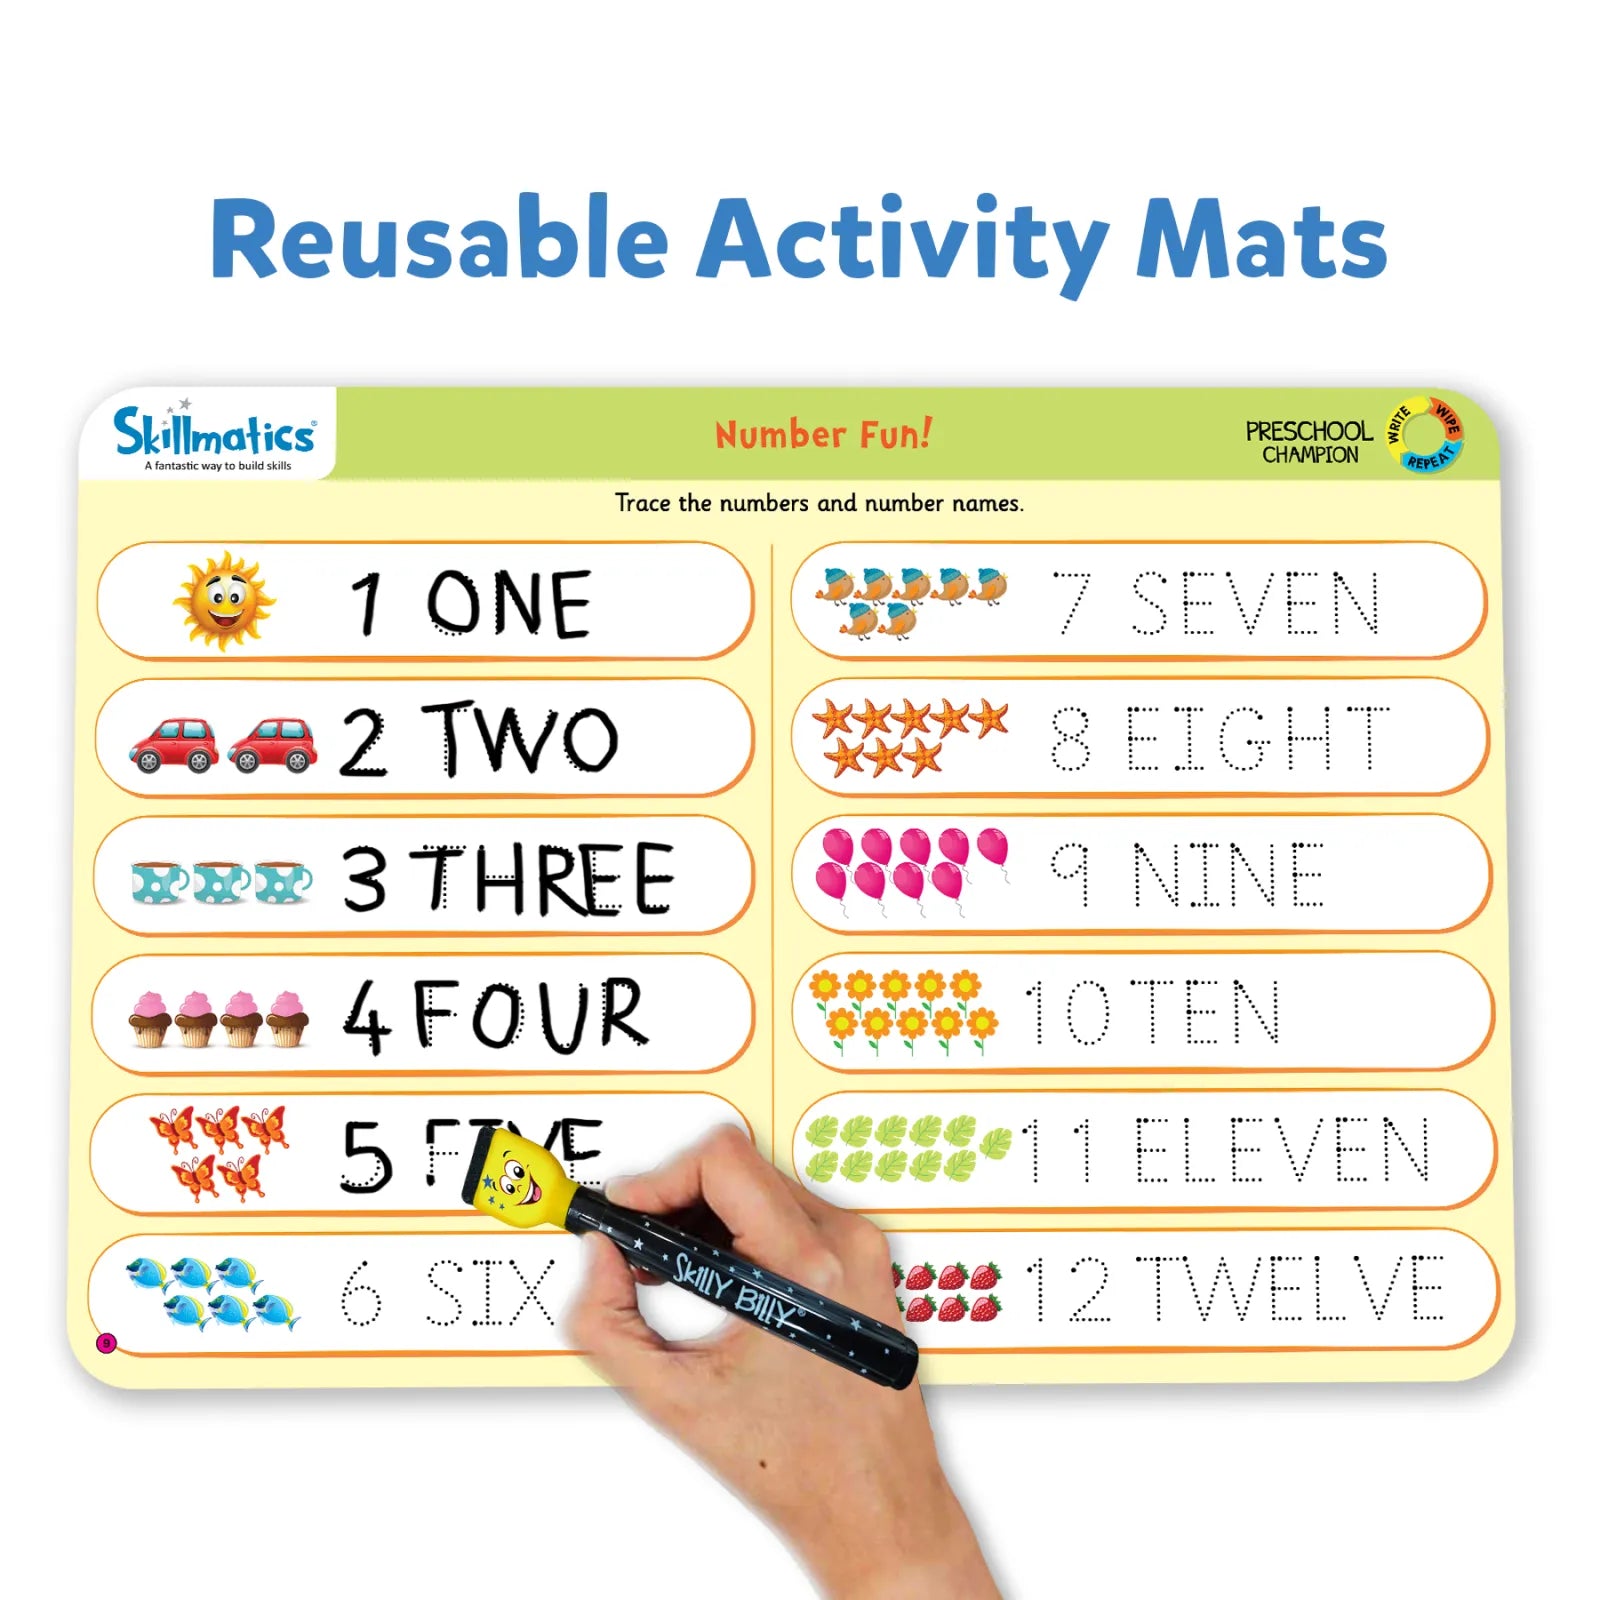 Search & Find + Preschool Champion | Reusable Activity Mats Combo (ages 3-6)